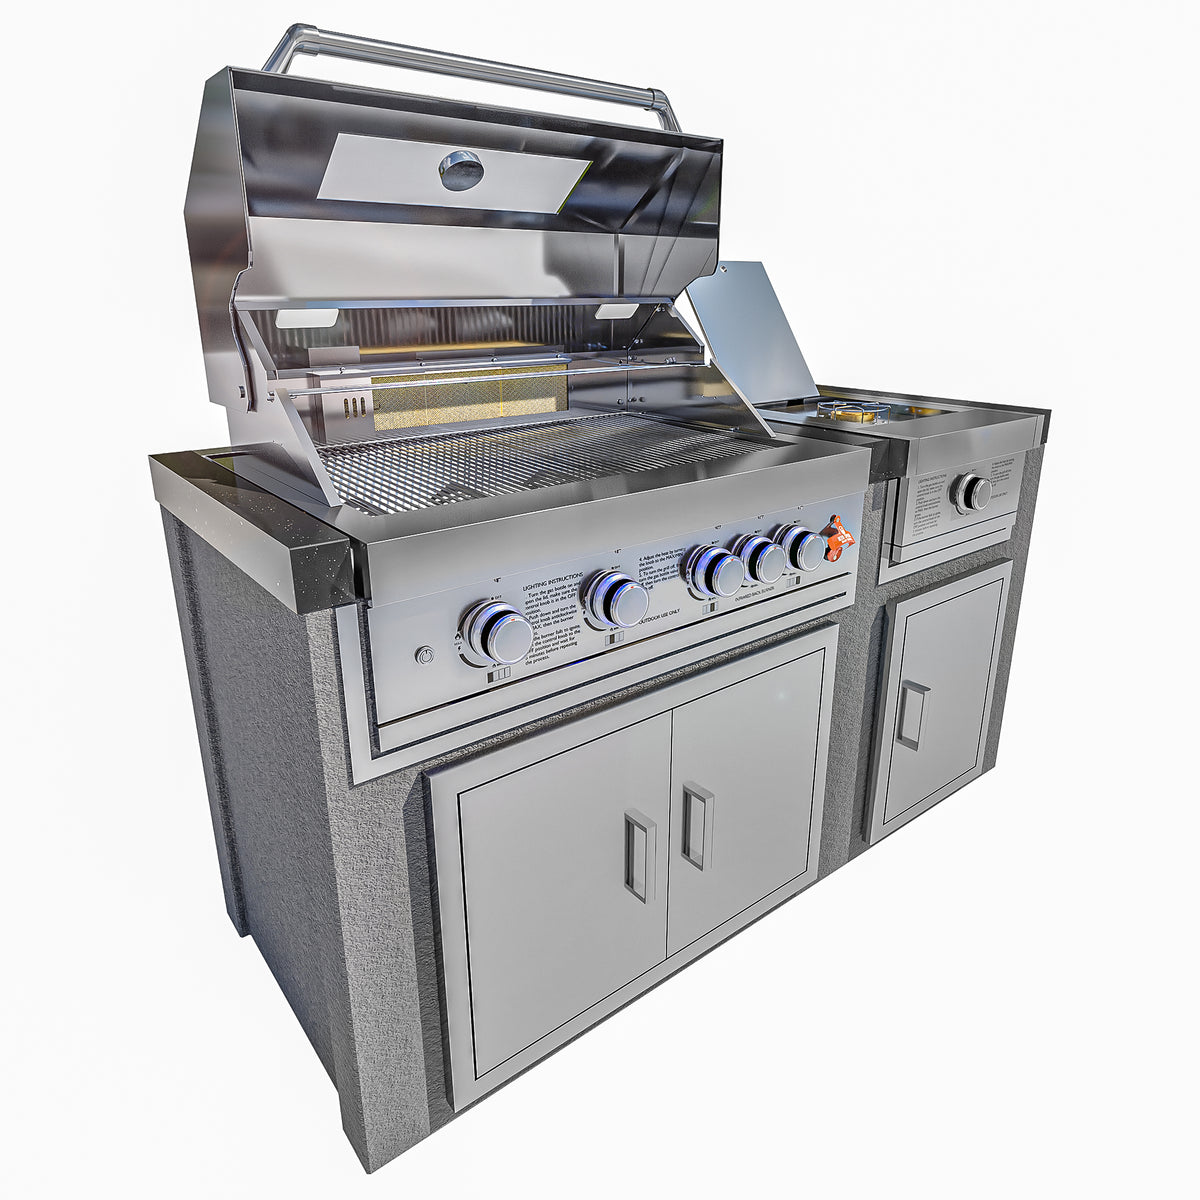 Draco Grills Avalon Stainless Steel L-Shape Corner Outdoor Kitchen with 4 Burner BBQ and Fridge